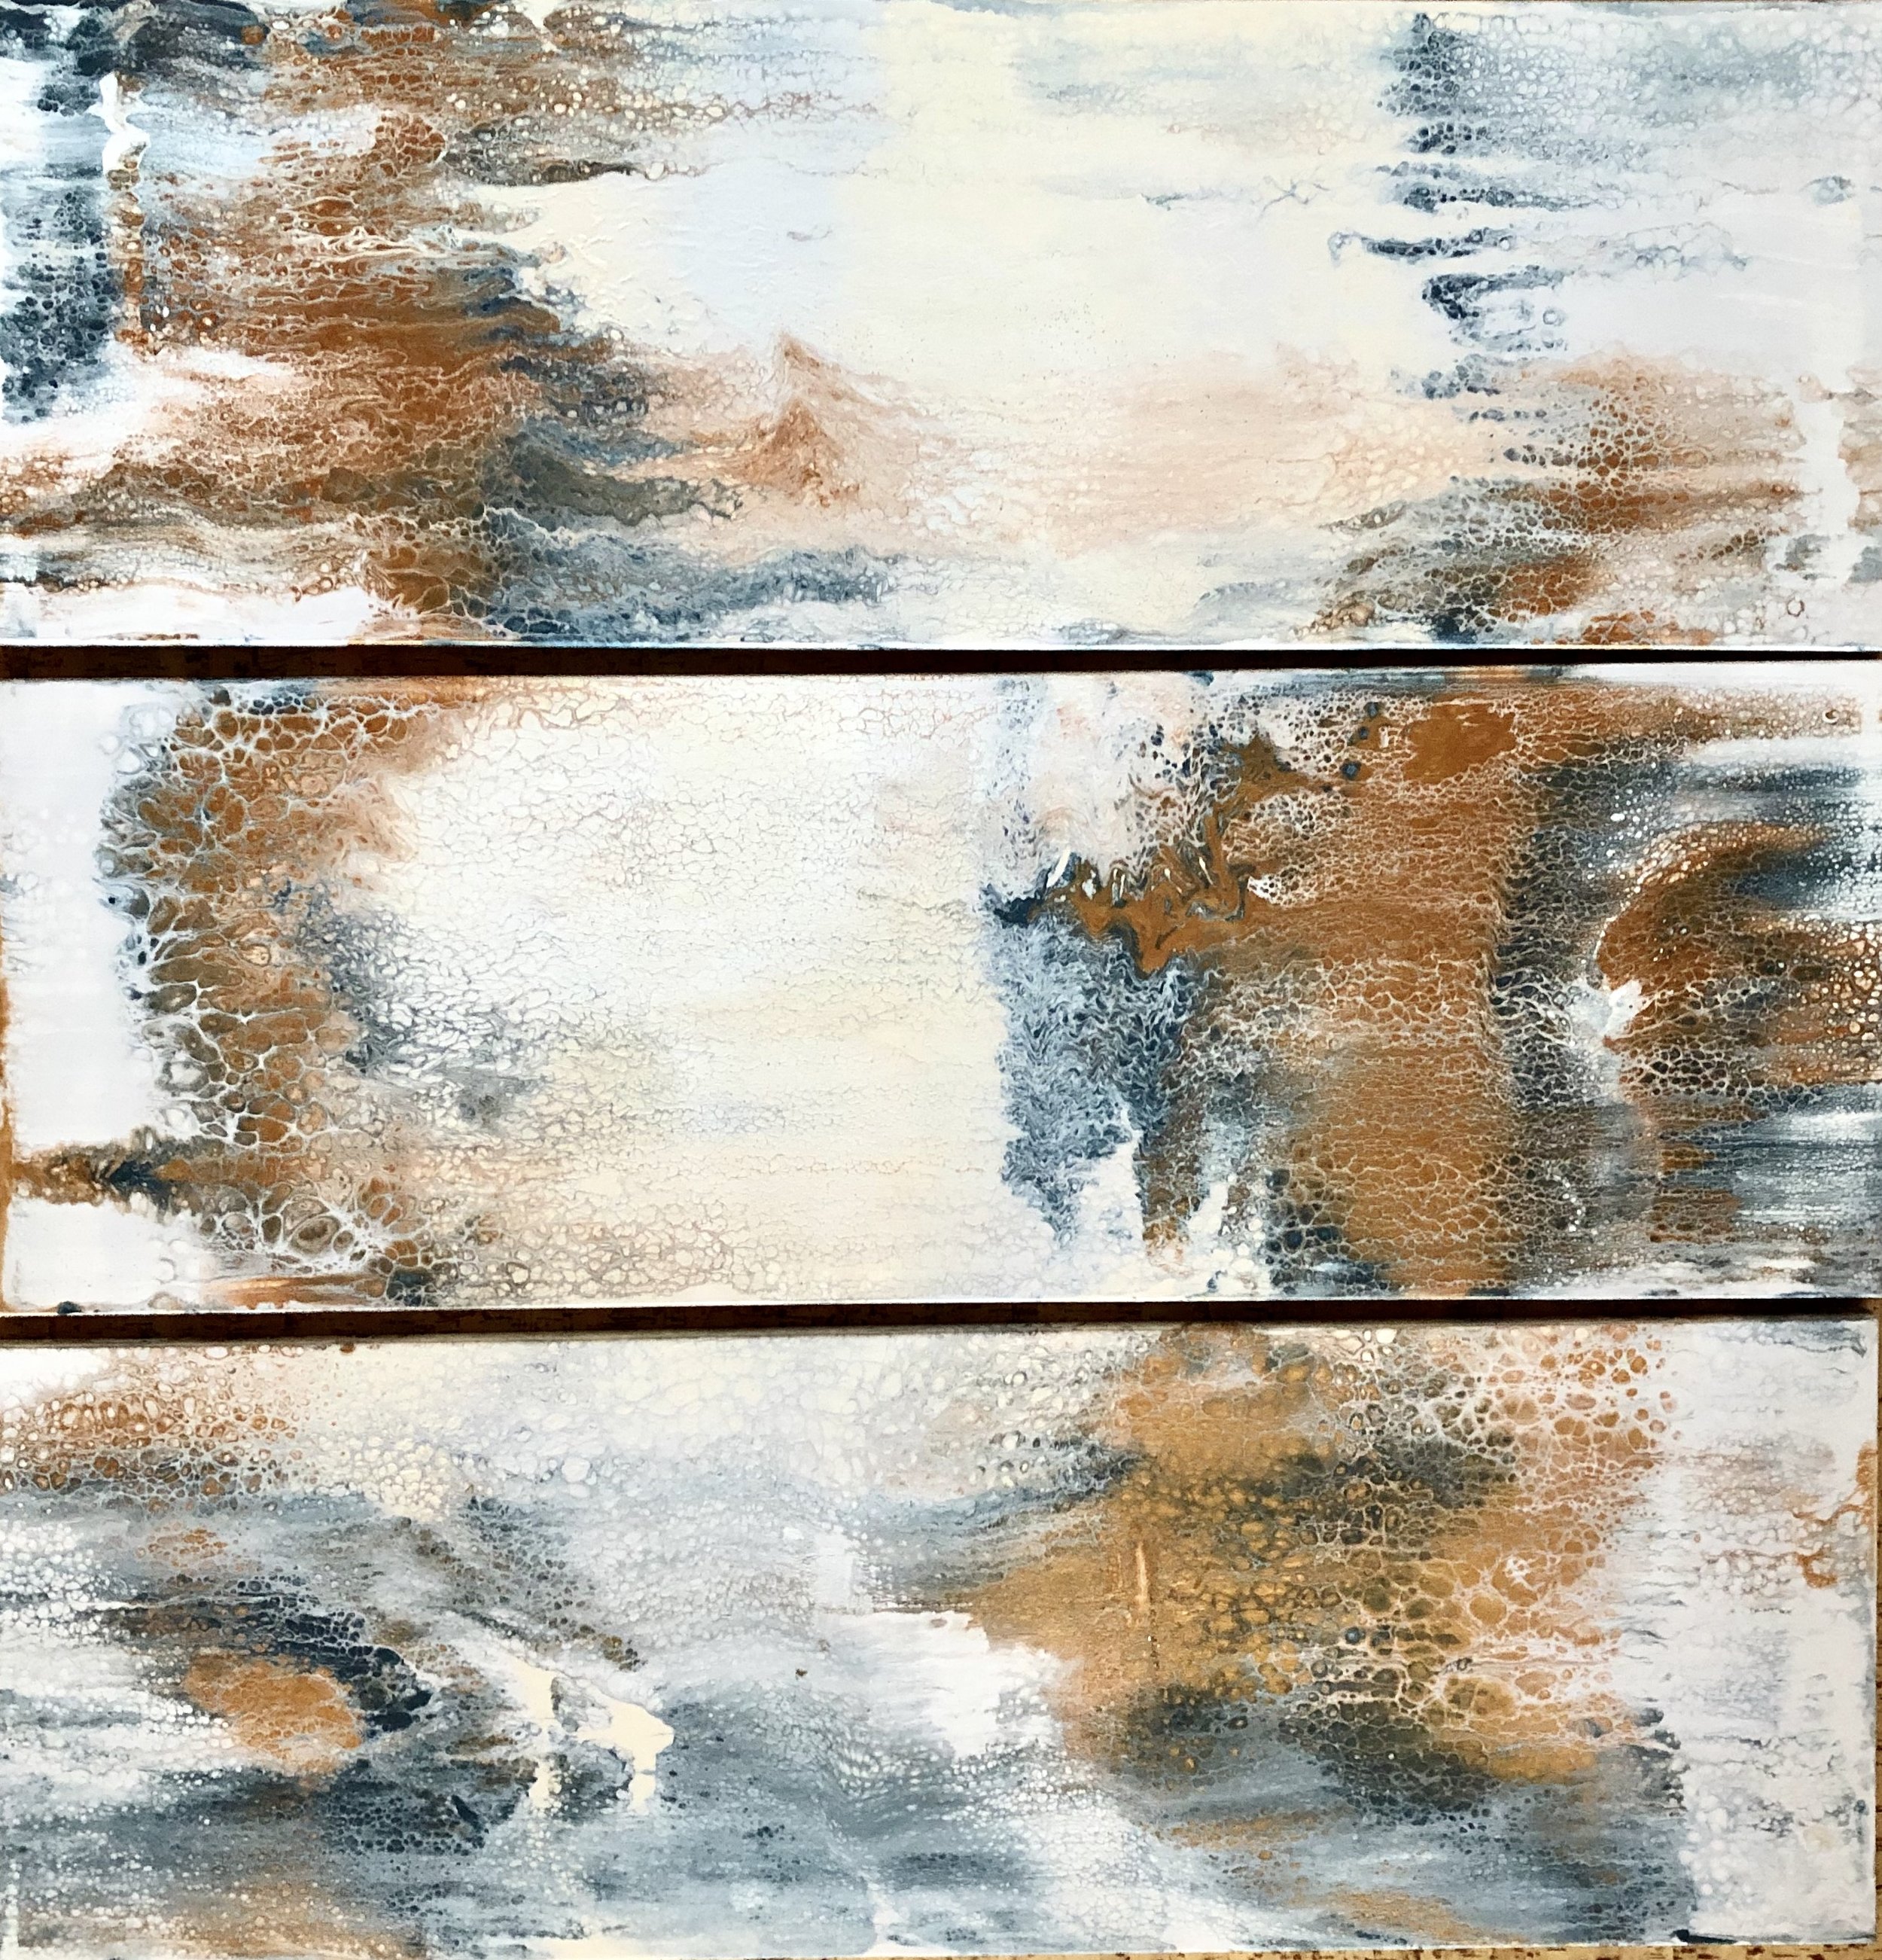 12x36" Triptych Avalanche Series- Sold! 